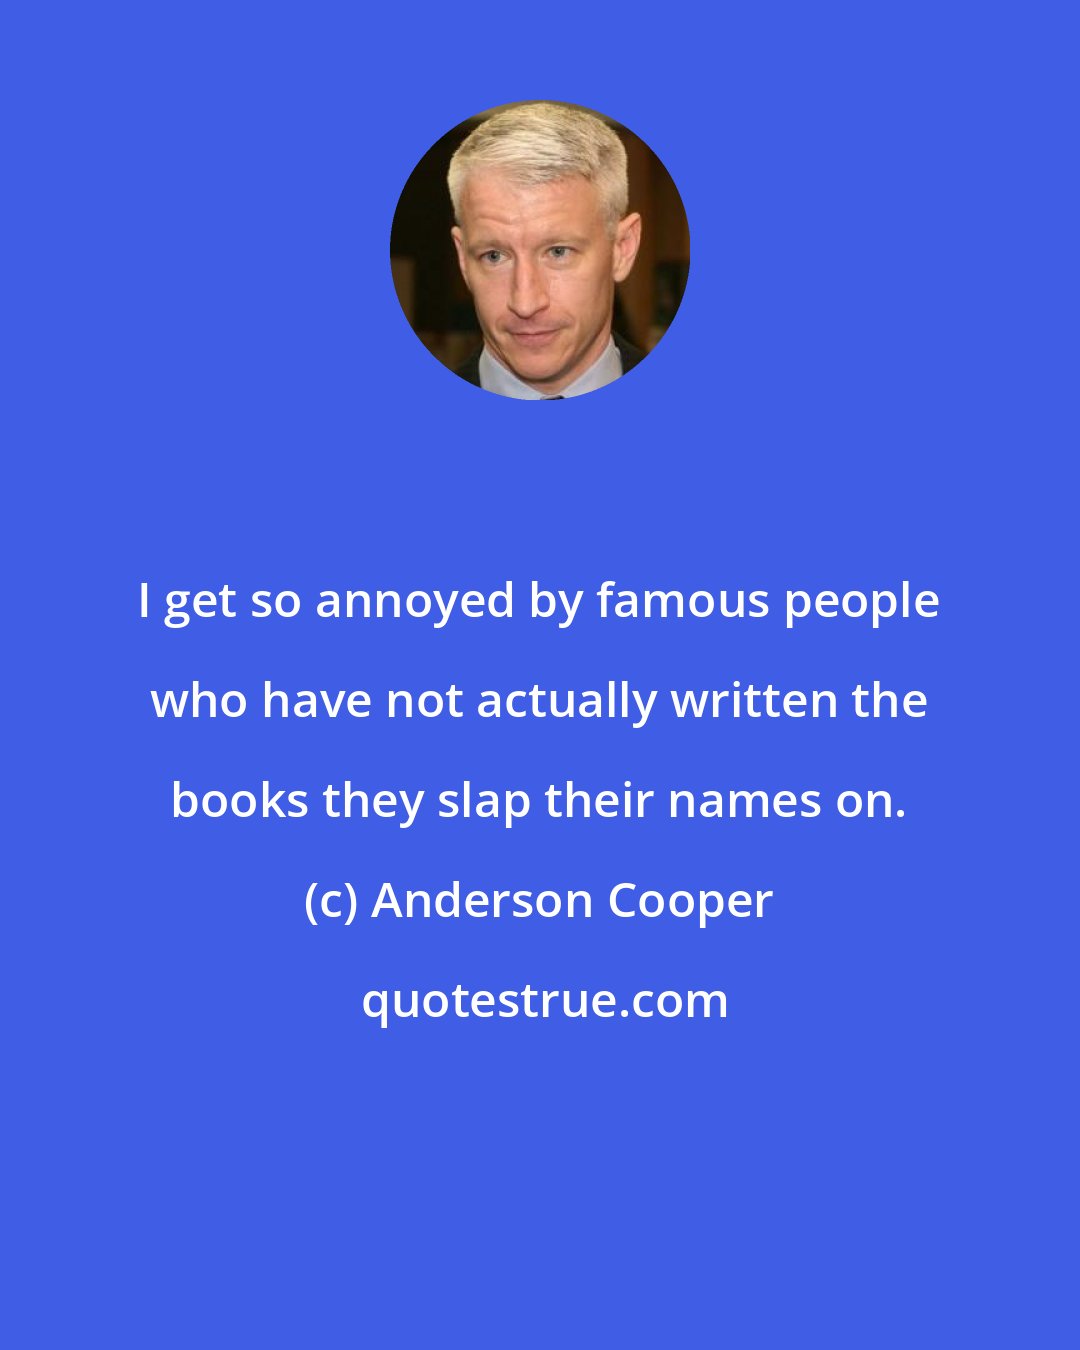 Anderson Cooper: I get so annoyed by famous people who have not actually written the books they slap their names on.